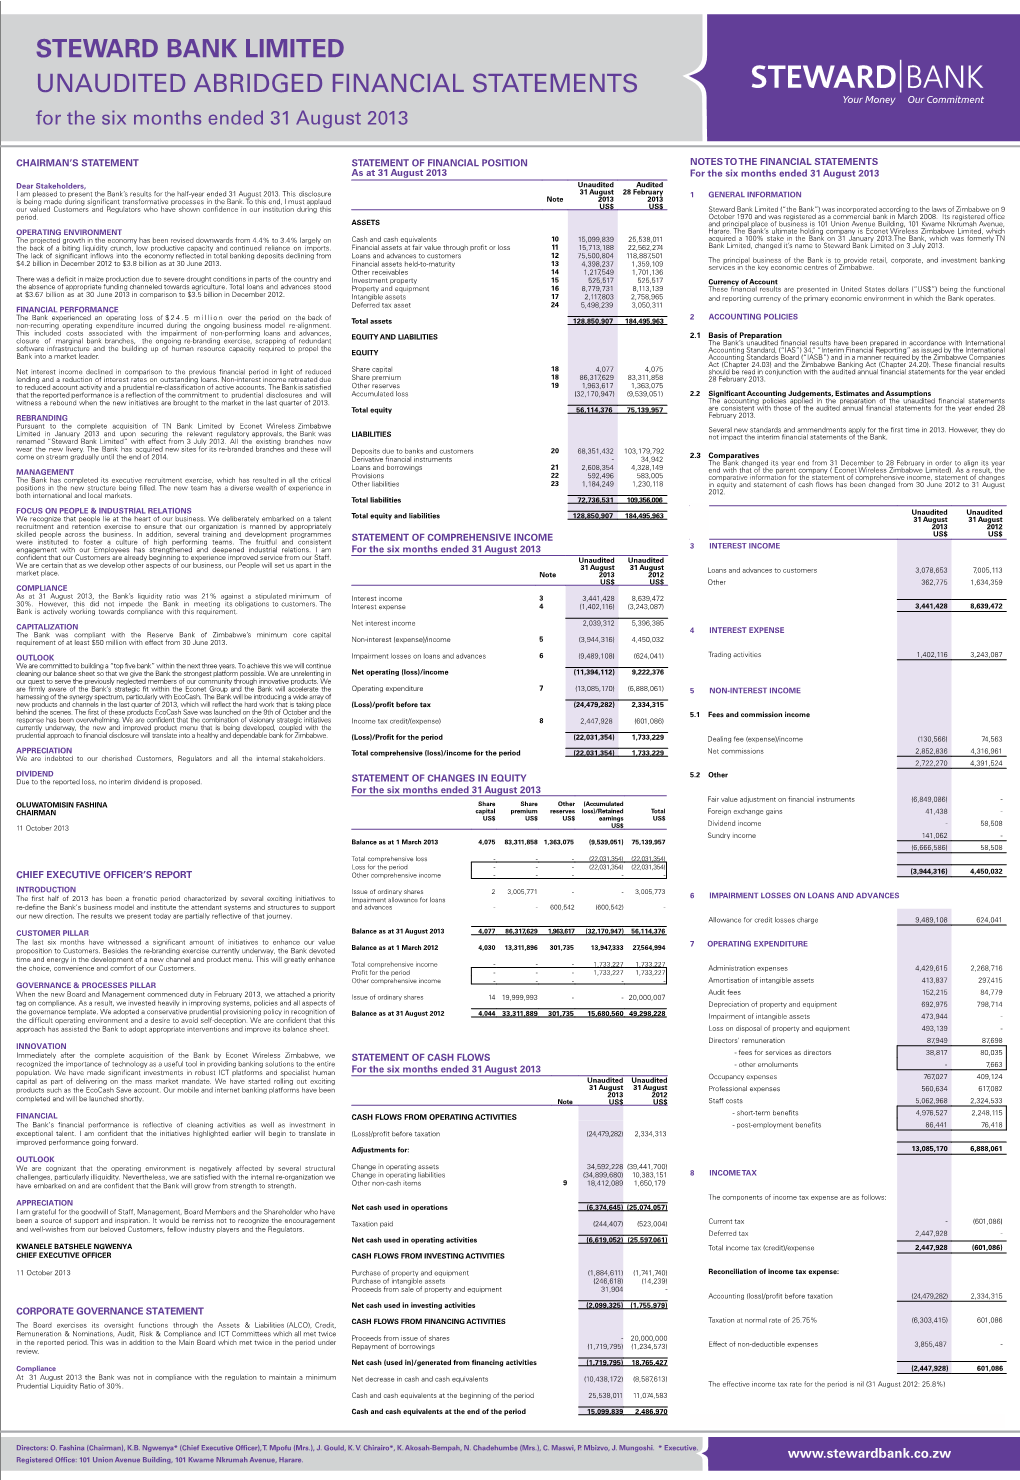 STEWARD BANK LIMITED UNAUDITED ABRIDGED FINANCIAL STATEMENTS for the Six Months Ended 31 August 2013